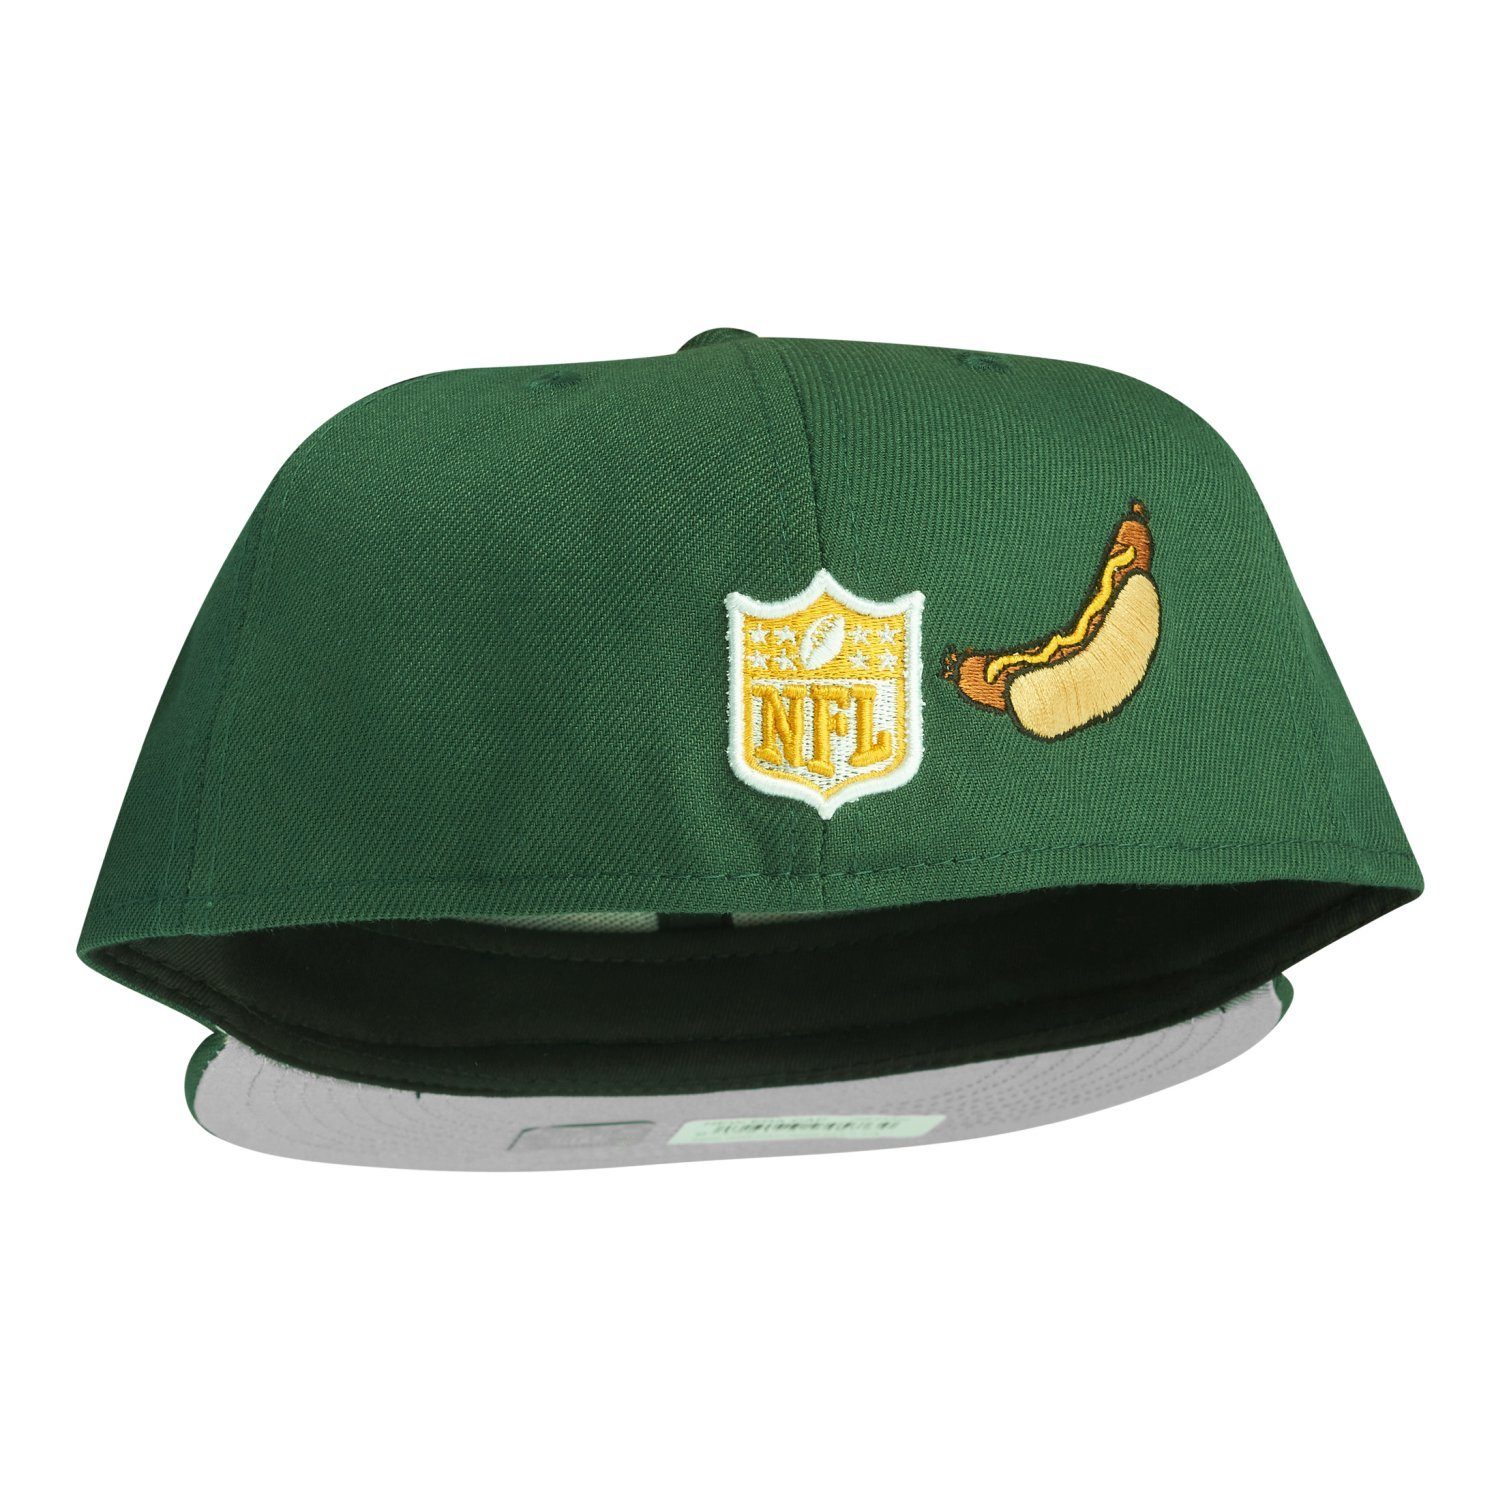 New Era Fitted NFL Bay CITY Cap Packers 59Fifty Green